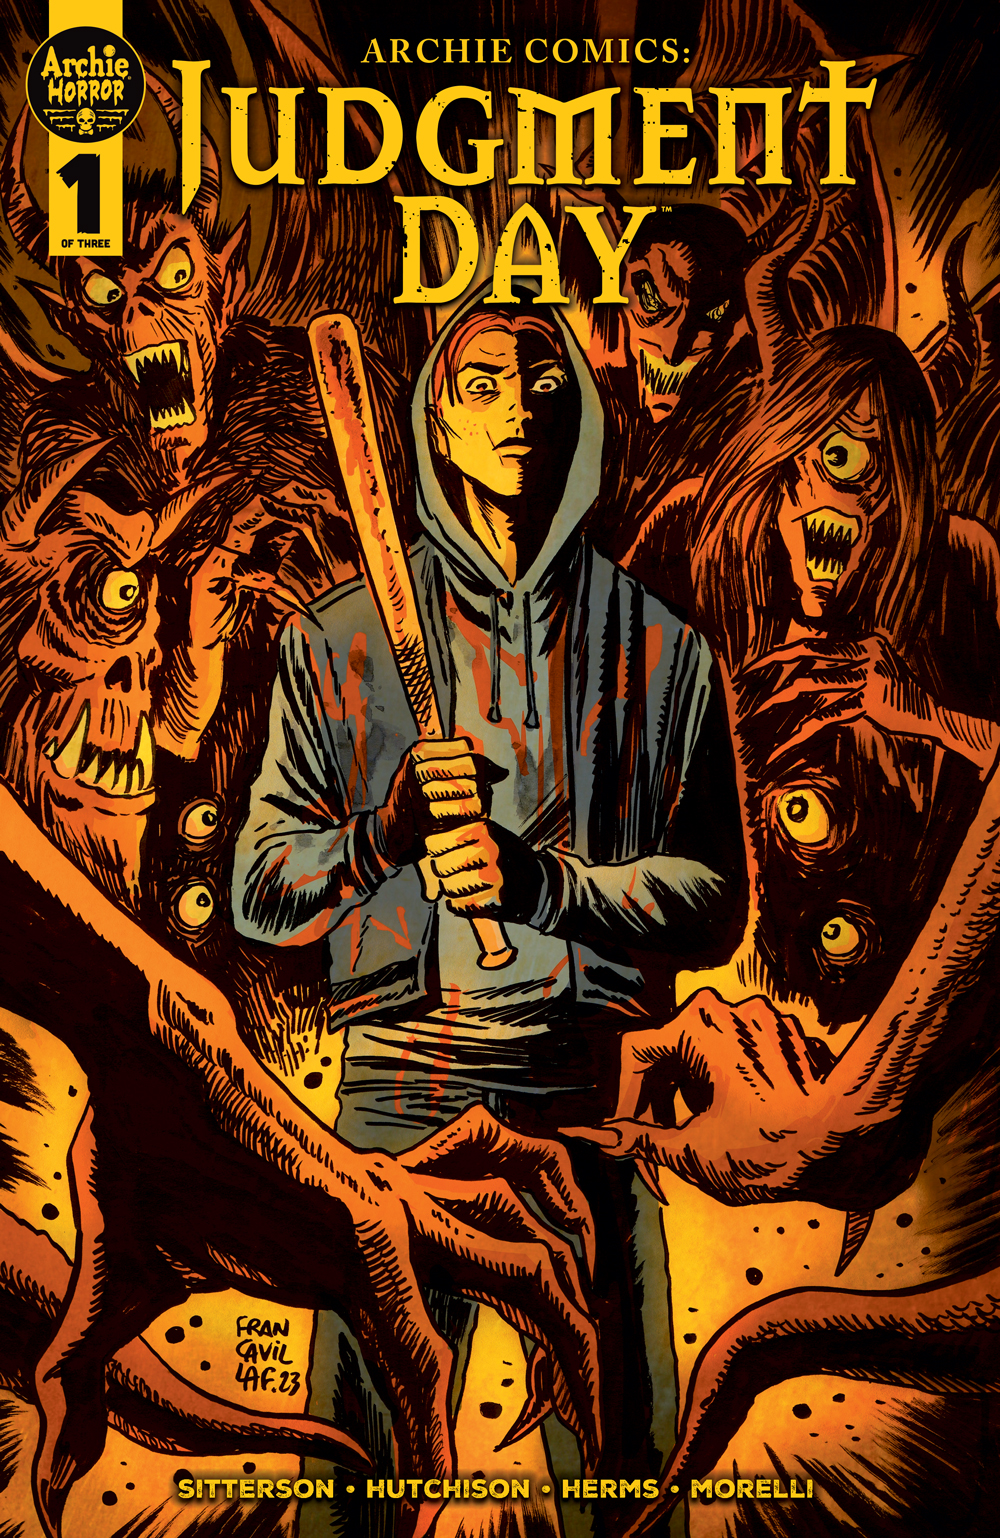 Archie Andrews stands in the middle of a swarm of orange- and sepia-tinted monsters, holding a baseball bat with a determined look. The bat and his hoodie sweatshirt are covered in blood. Half of his face is obscured in shadow.